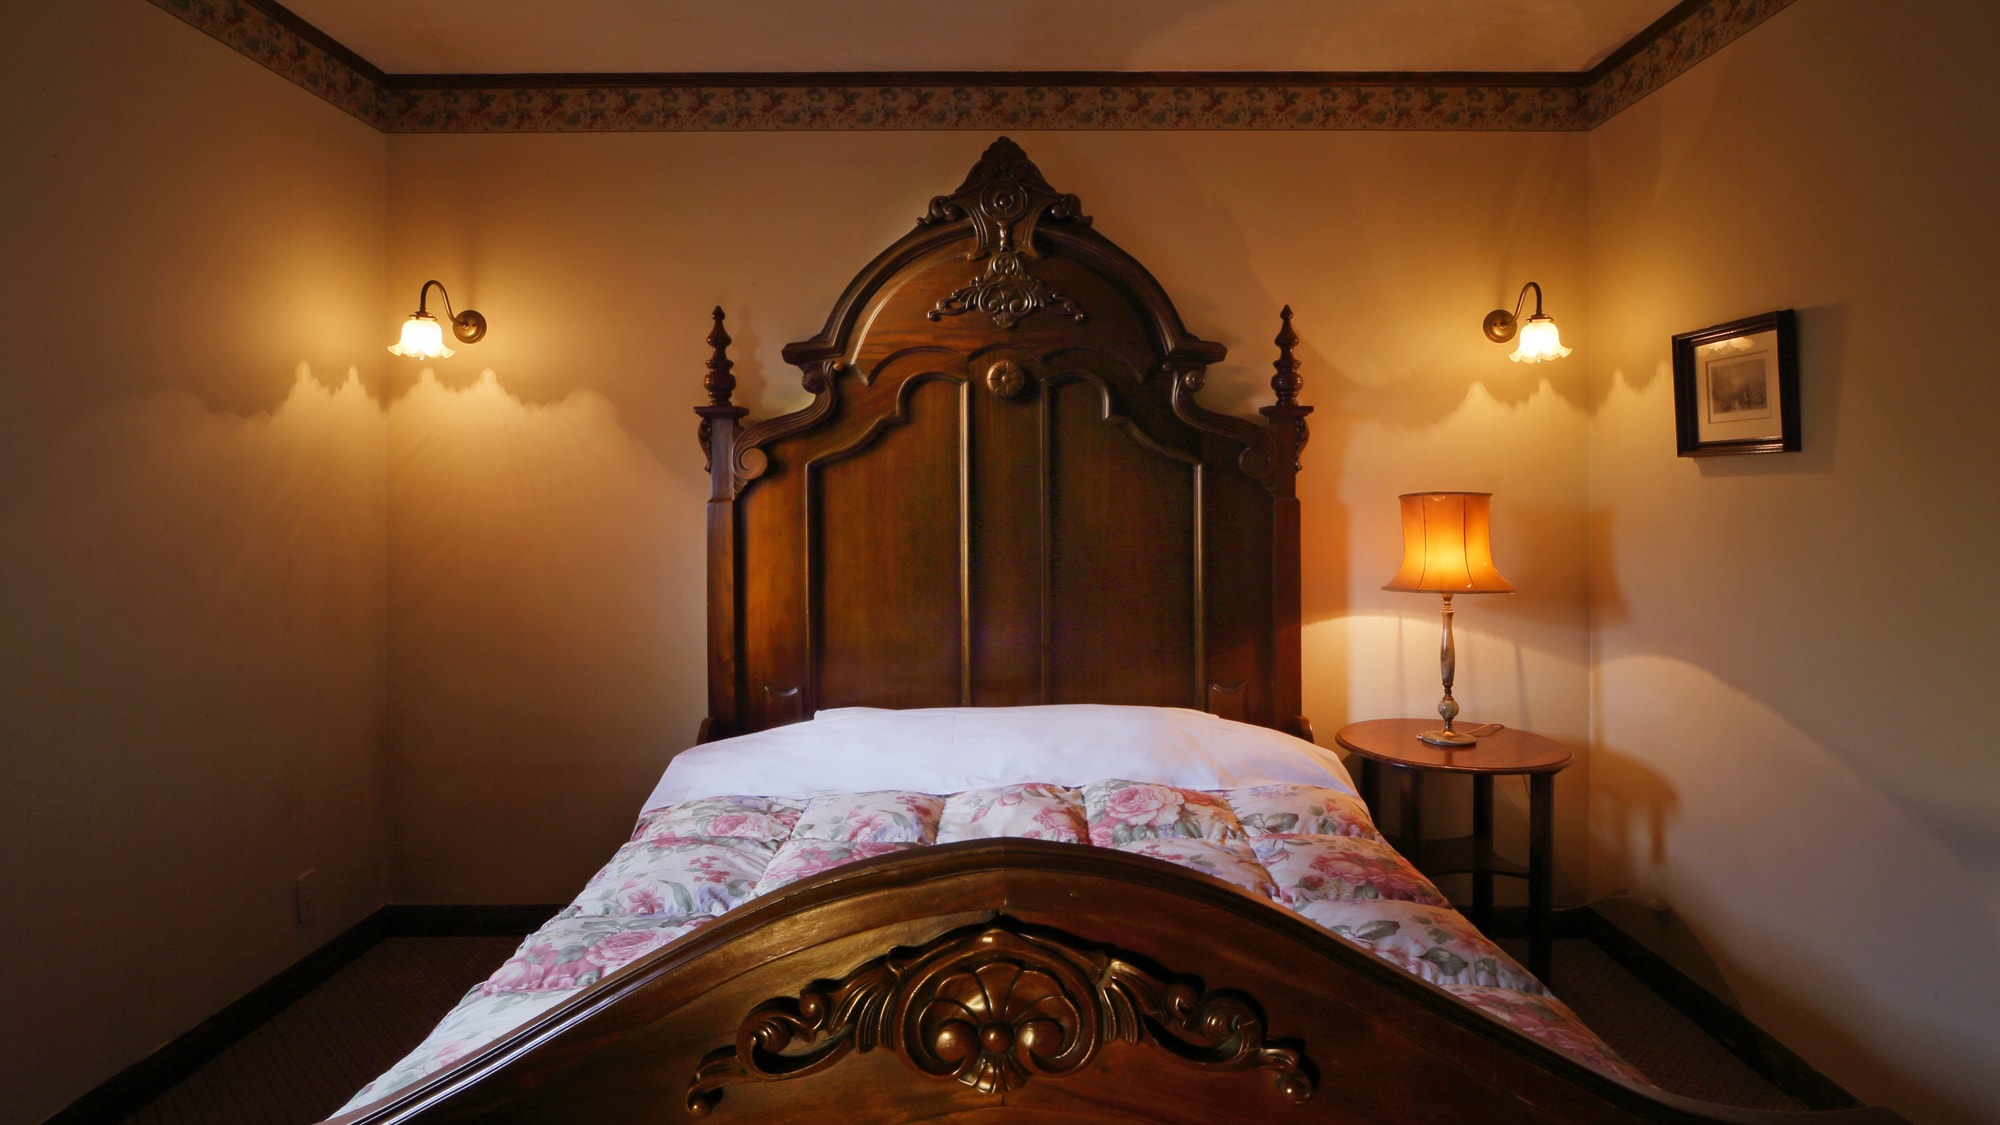 ◆ Room 302 ◆ Accented with European-style beds imported directly from England